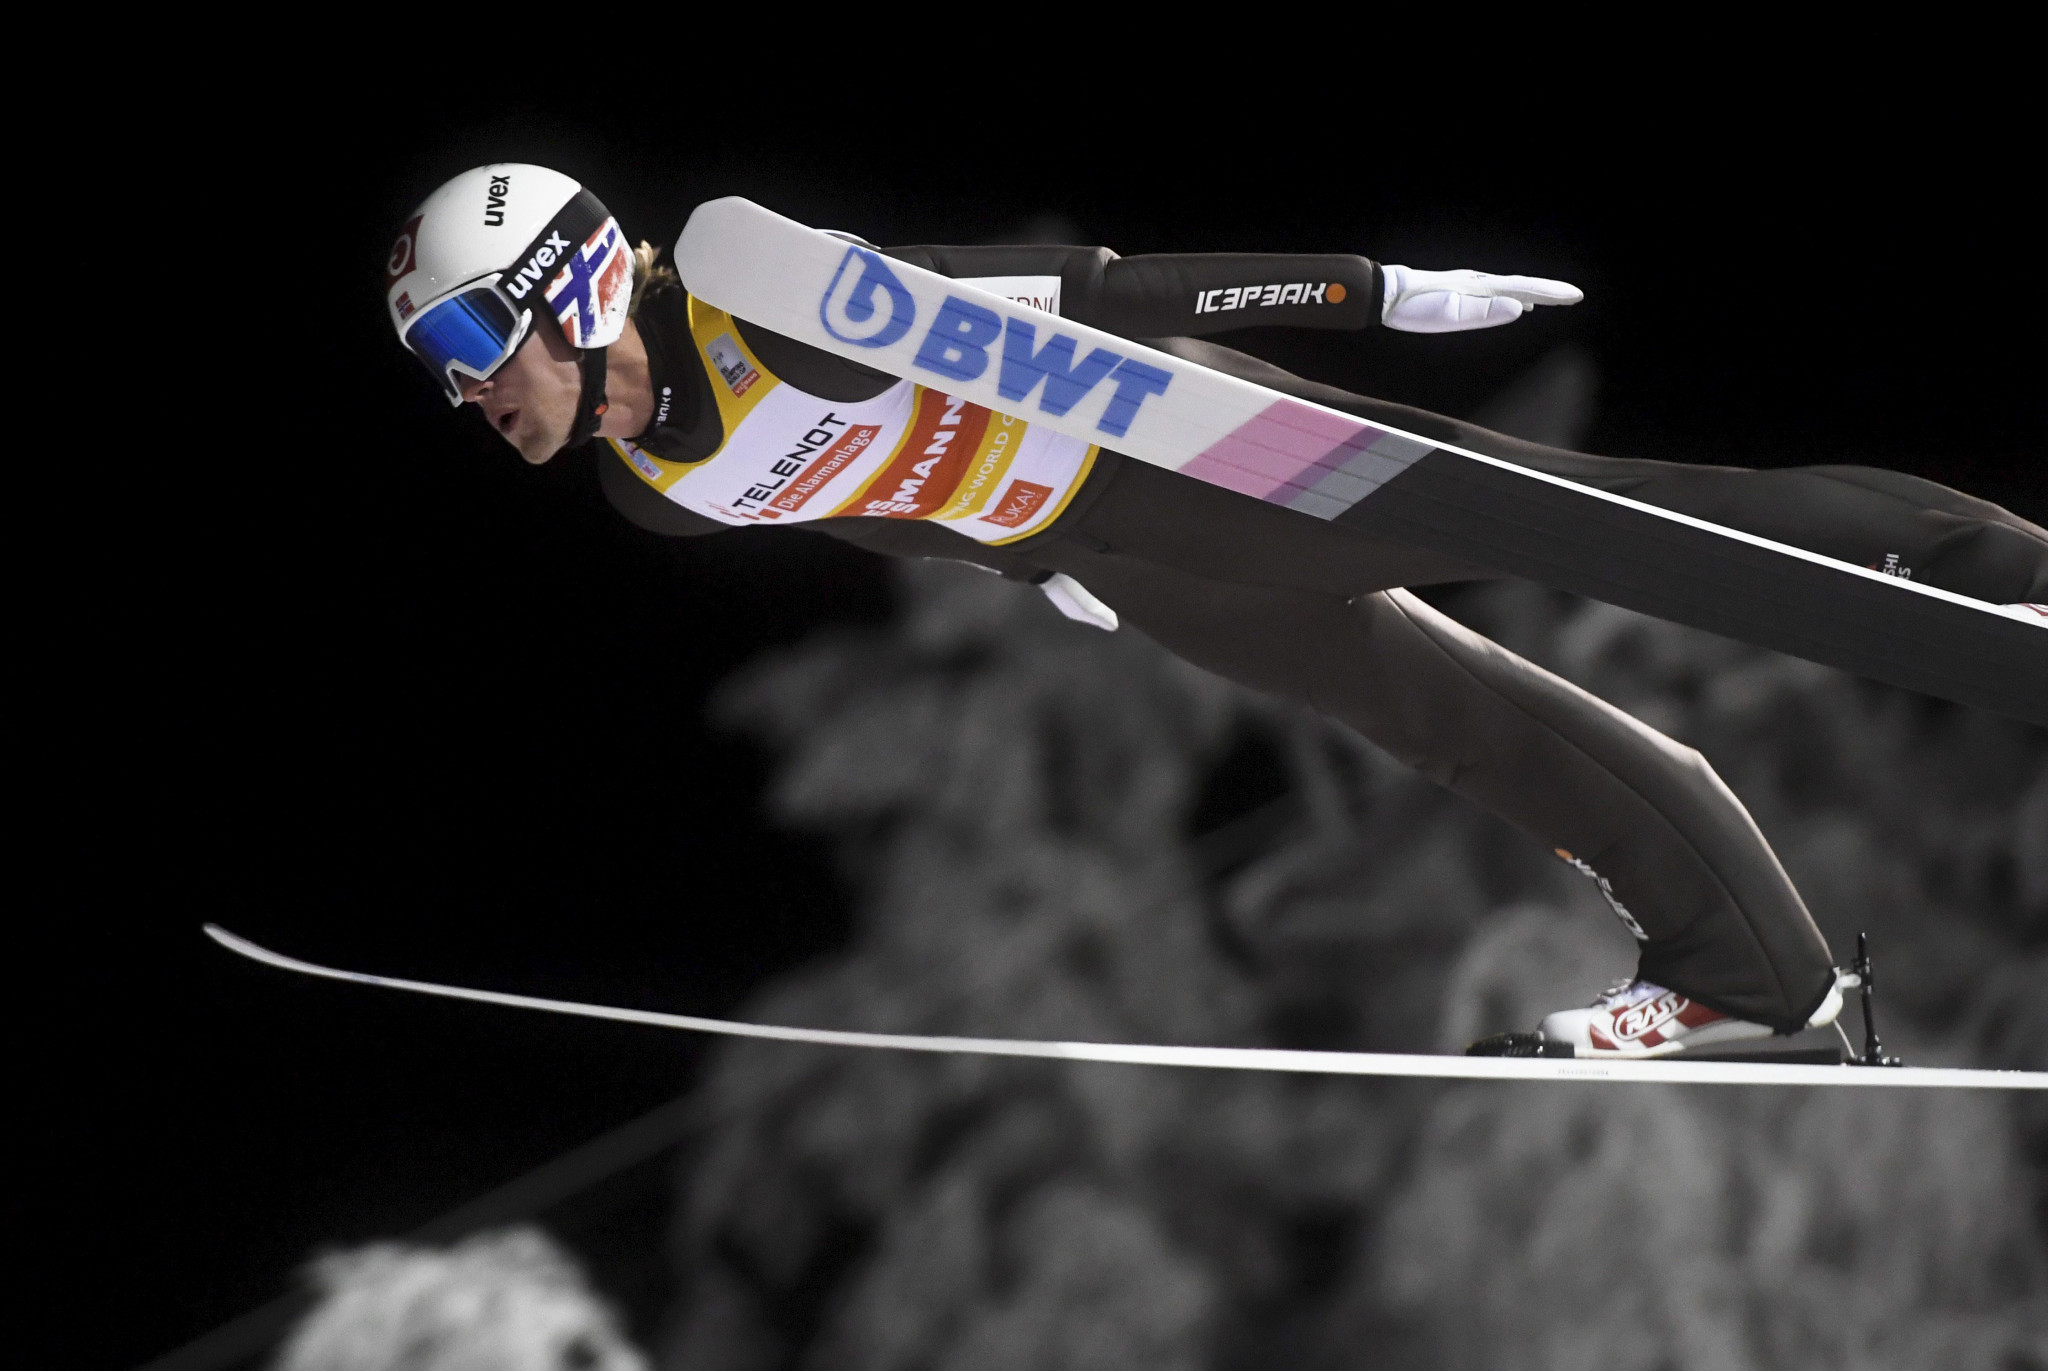 Tande records second straight victory at FIS Ski Jumping World Cup